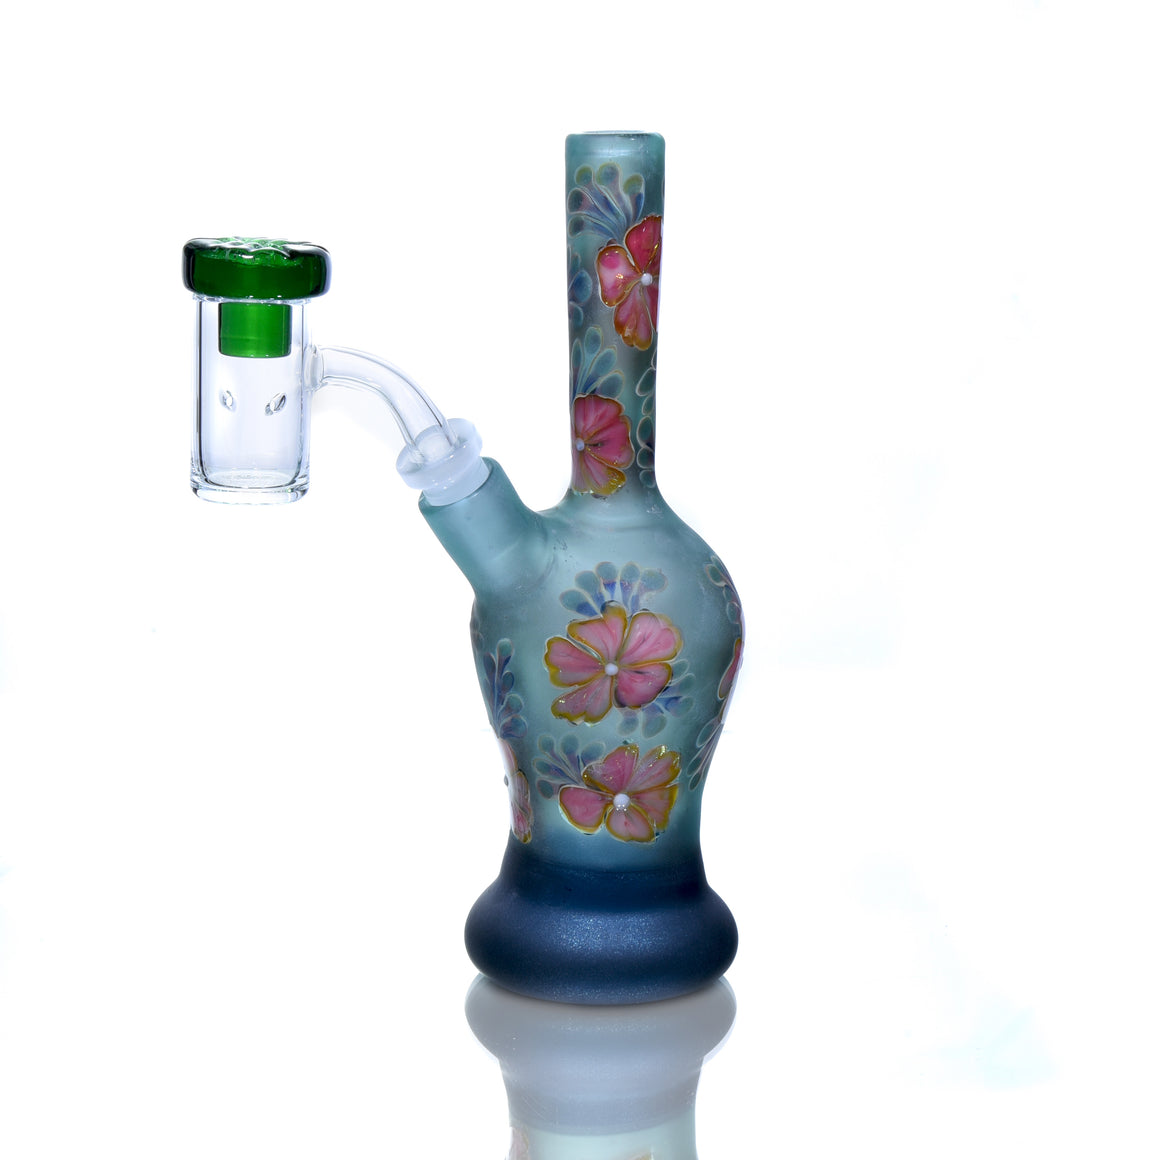 Frosted Floral Pattern Vase Mini Tube w/ Removable Downstem - Nemo - 10mm Female